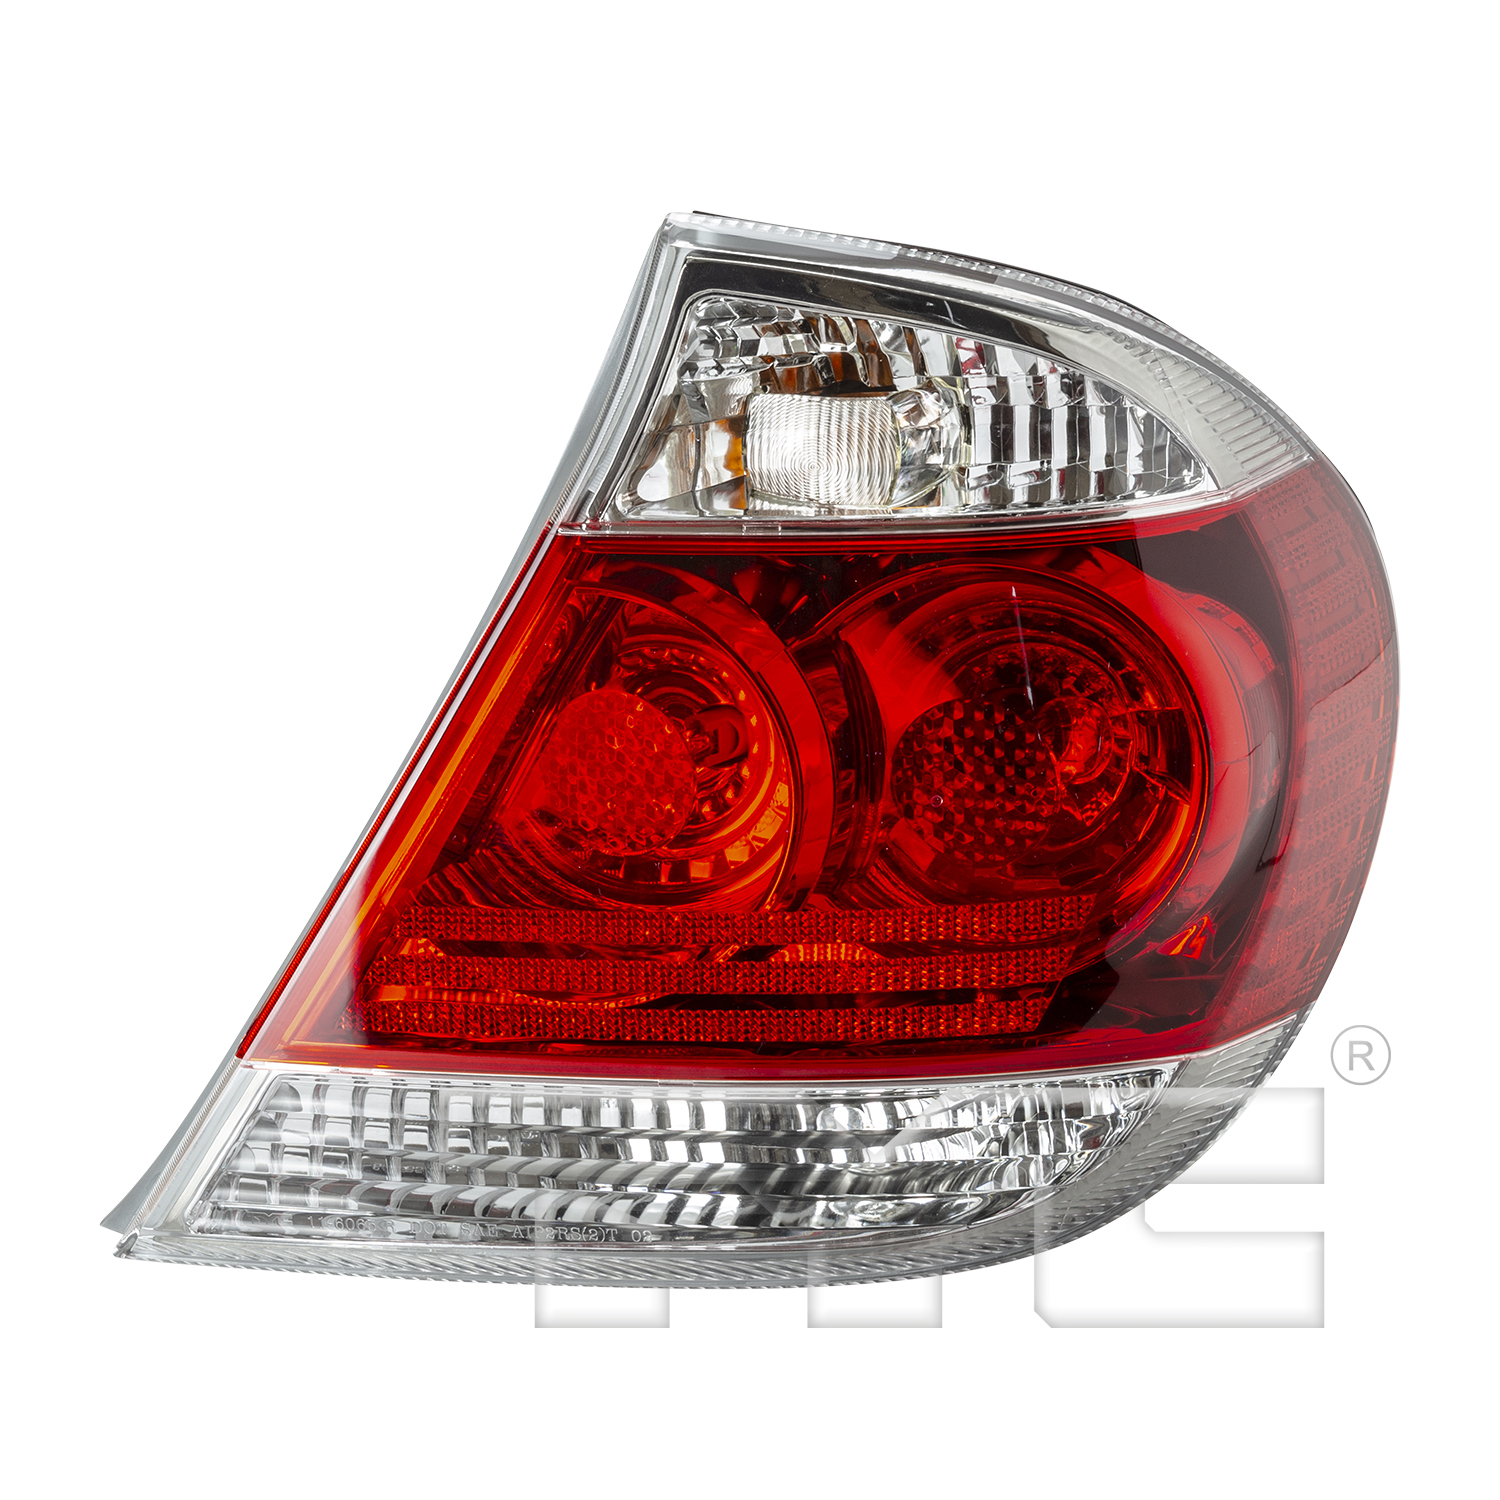 Aftermarket TAILLIGHTS for TOYOTA - CAMRY, CAMRY,05-06,RT Taillamp assy